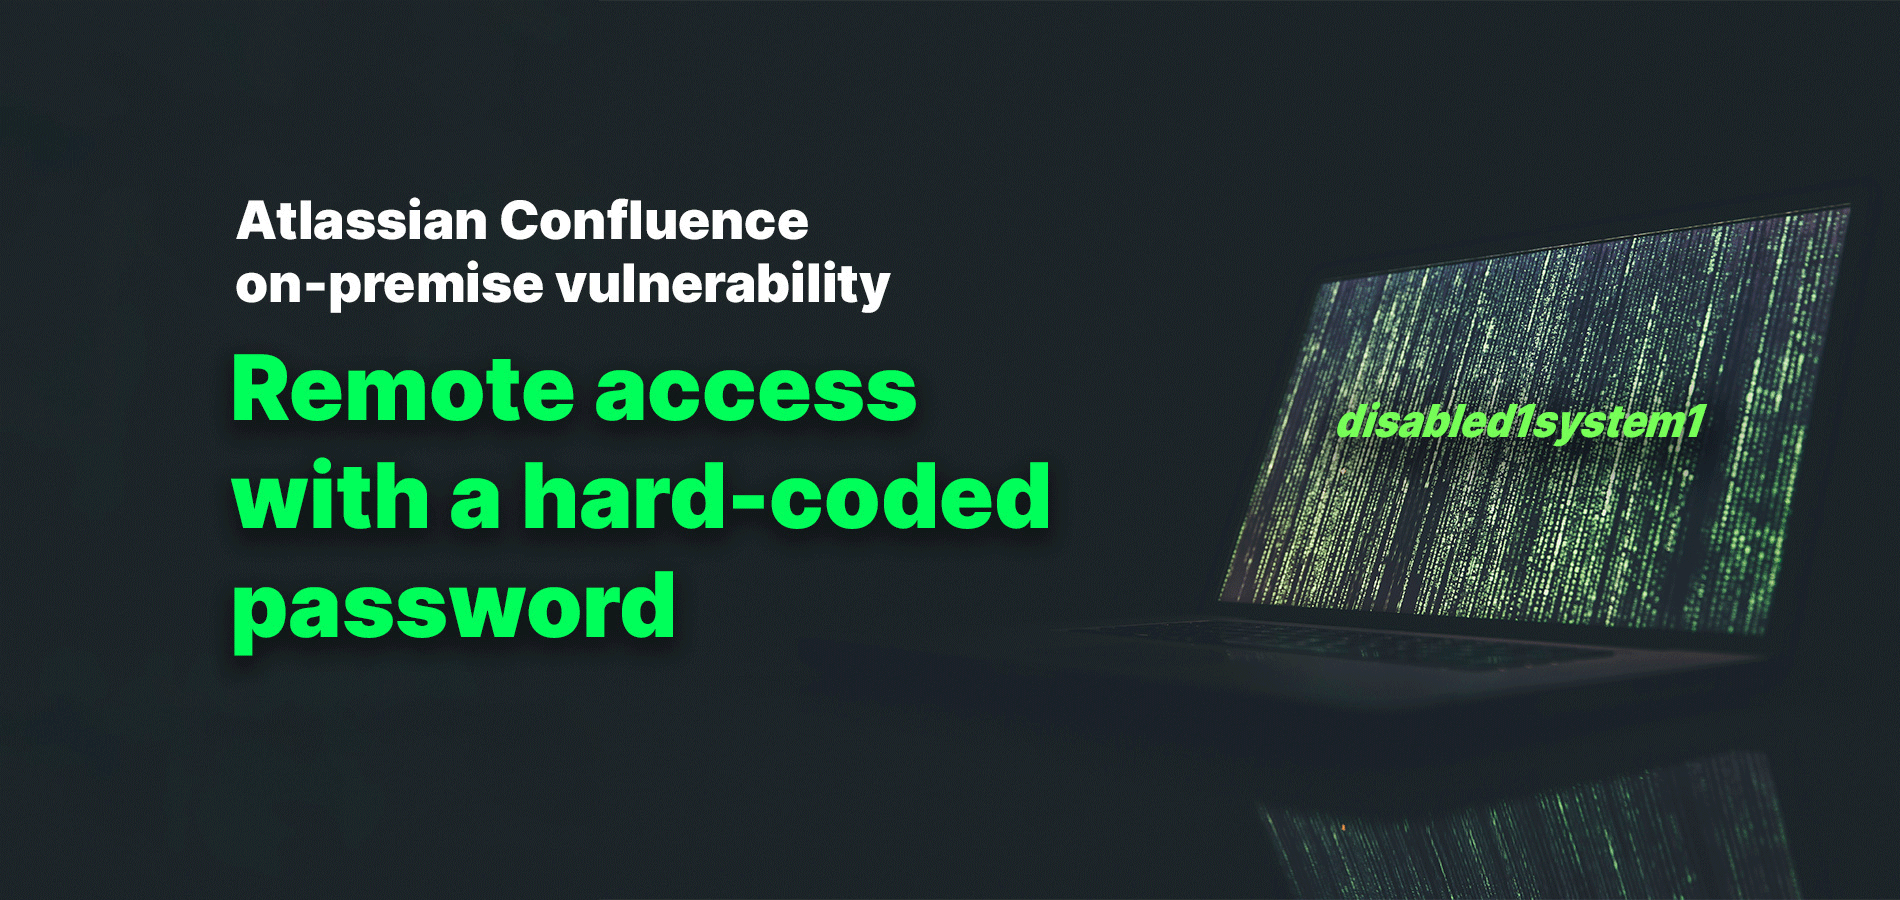 Atlassian Confluence on-premise vulnerability: Remote access with a hard-coded password.